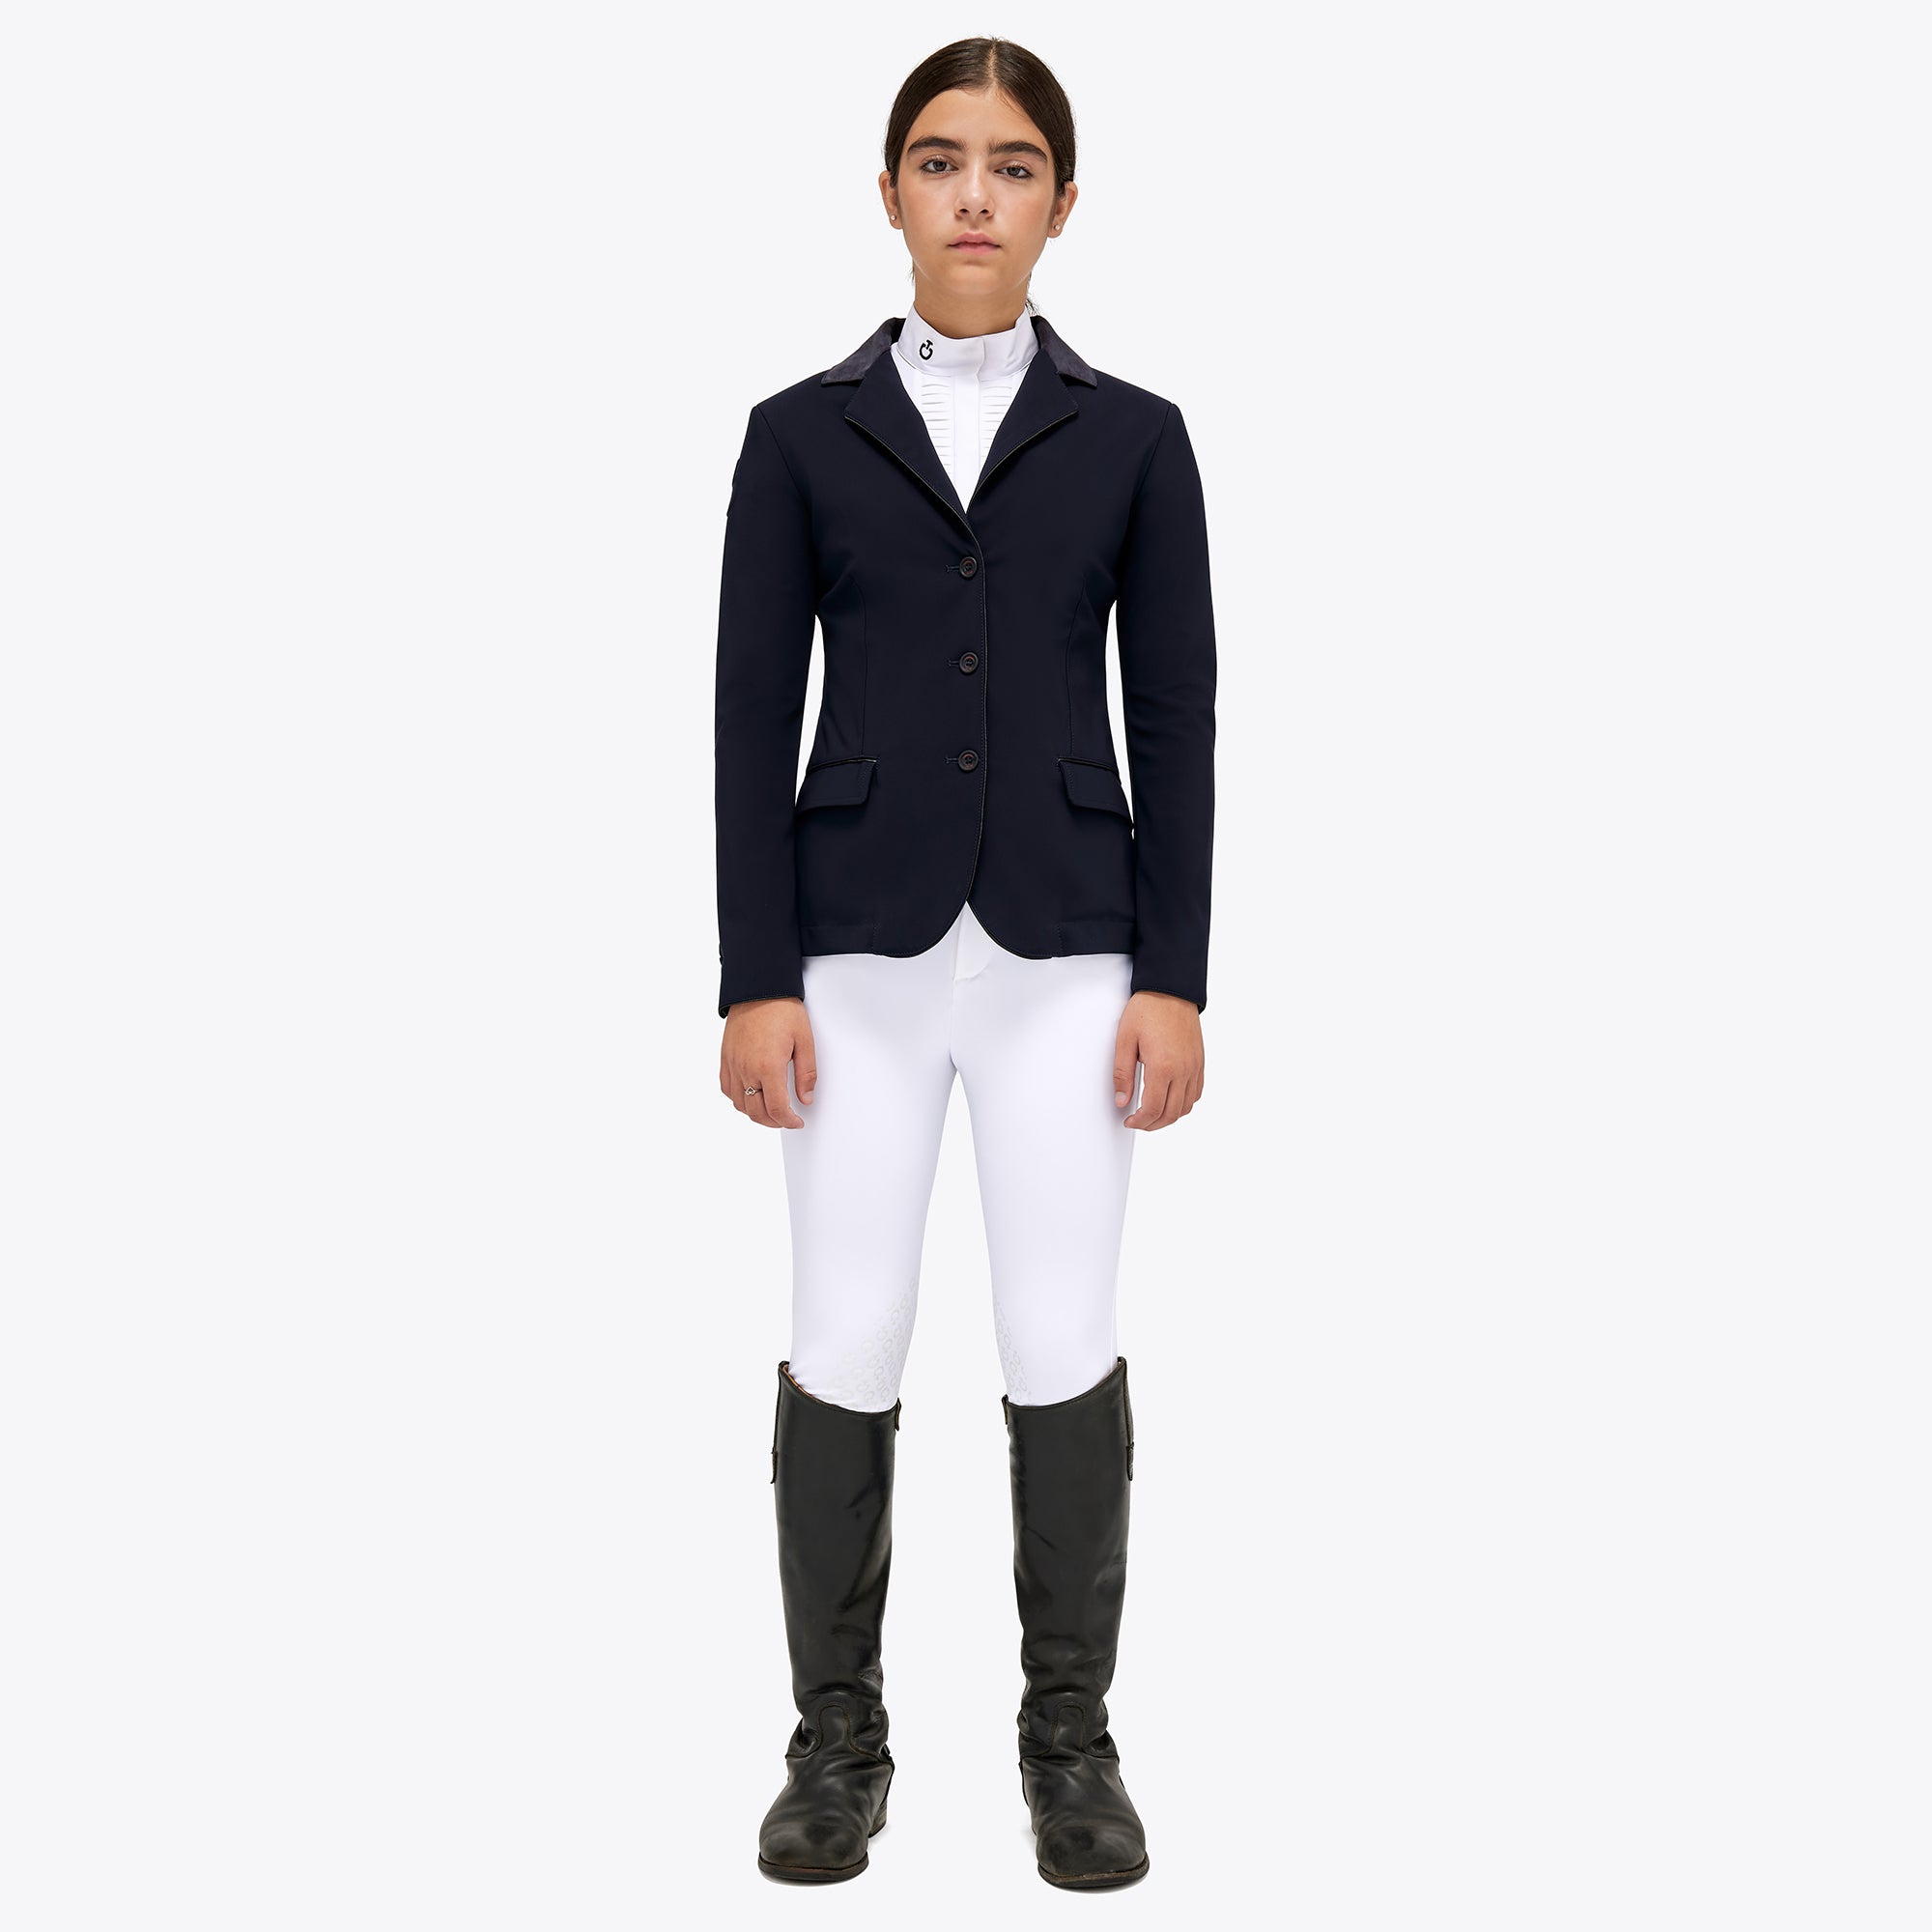 Girls Young Rider Show Jacket - Navy